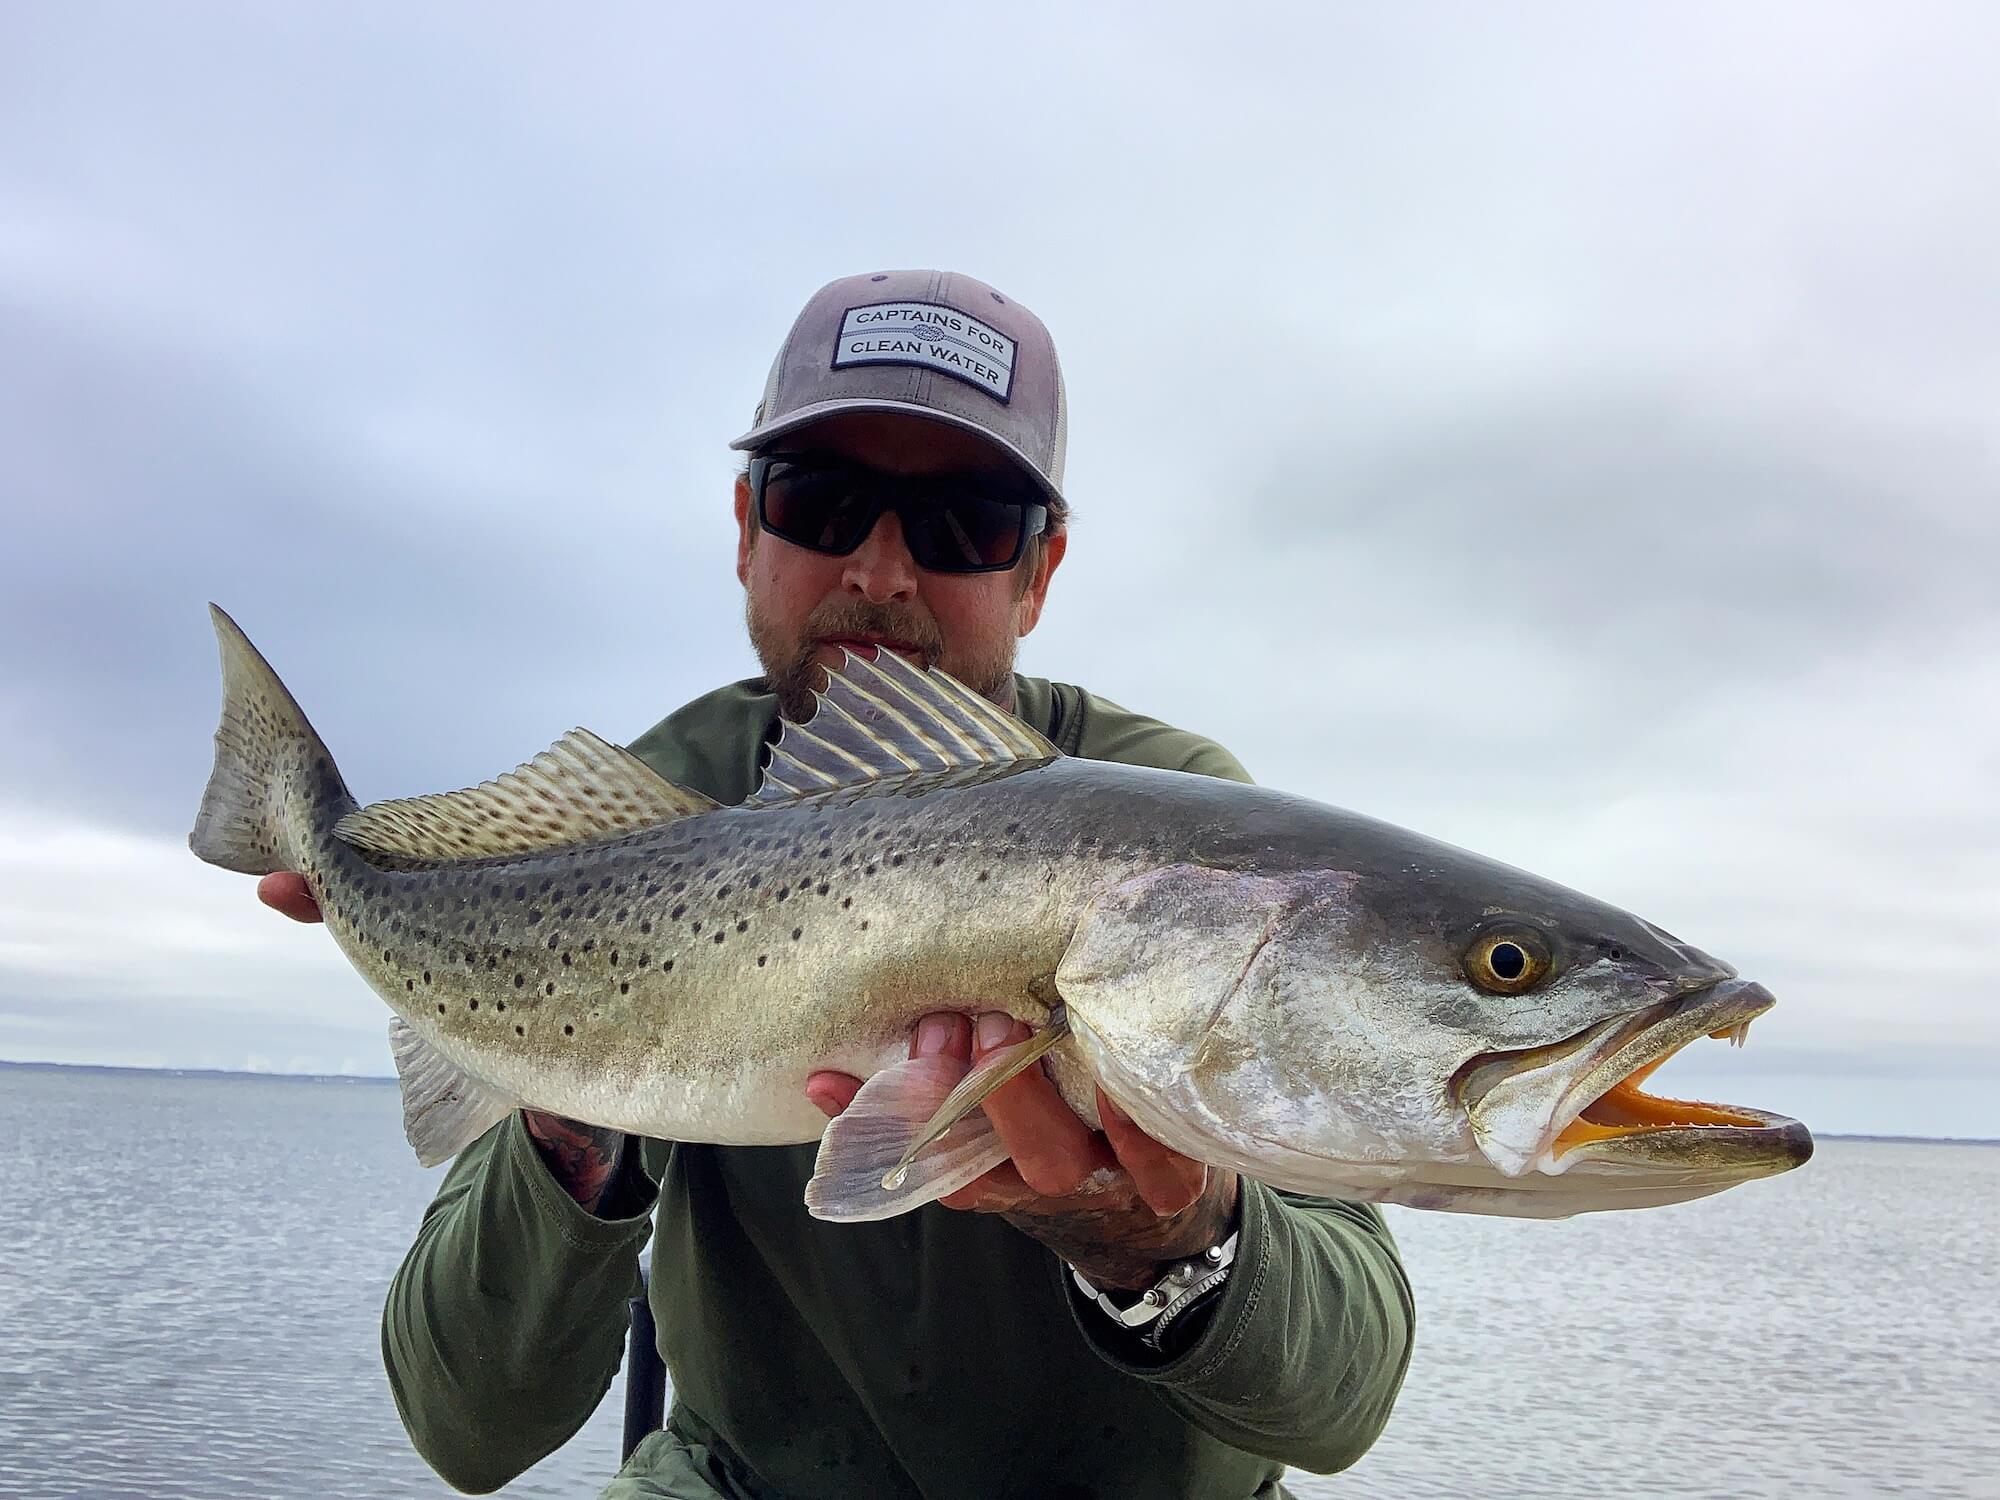 Speckled trout aka Specks find suitable shelter near sand pits